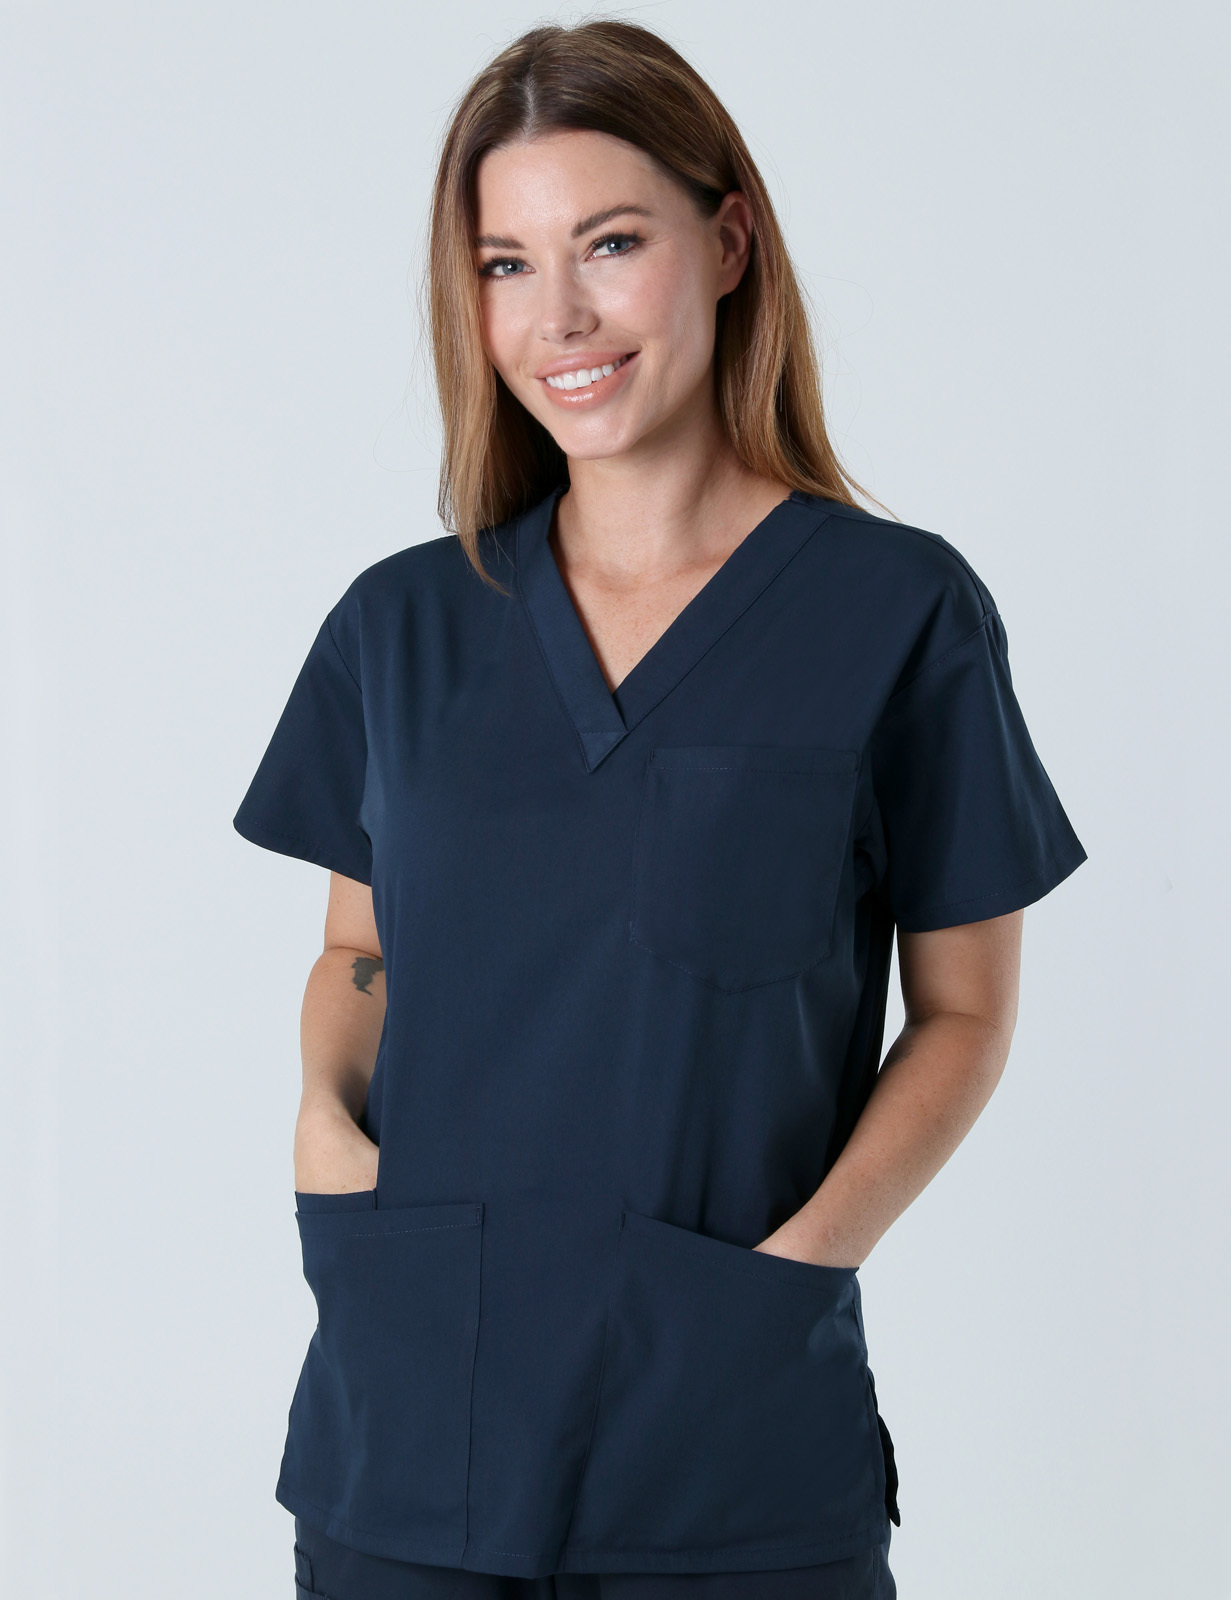 Royal Melbourne Hospital - ICU (4 Pocket Scrub Top and Cargo Pants in Navy incl Logos)